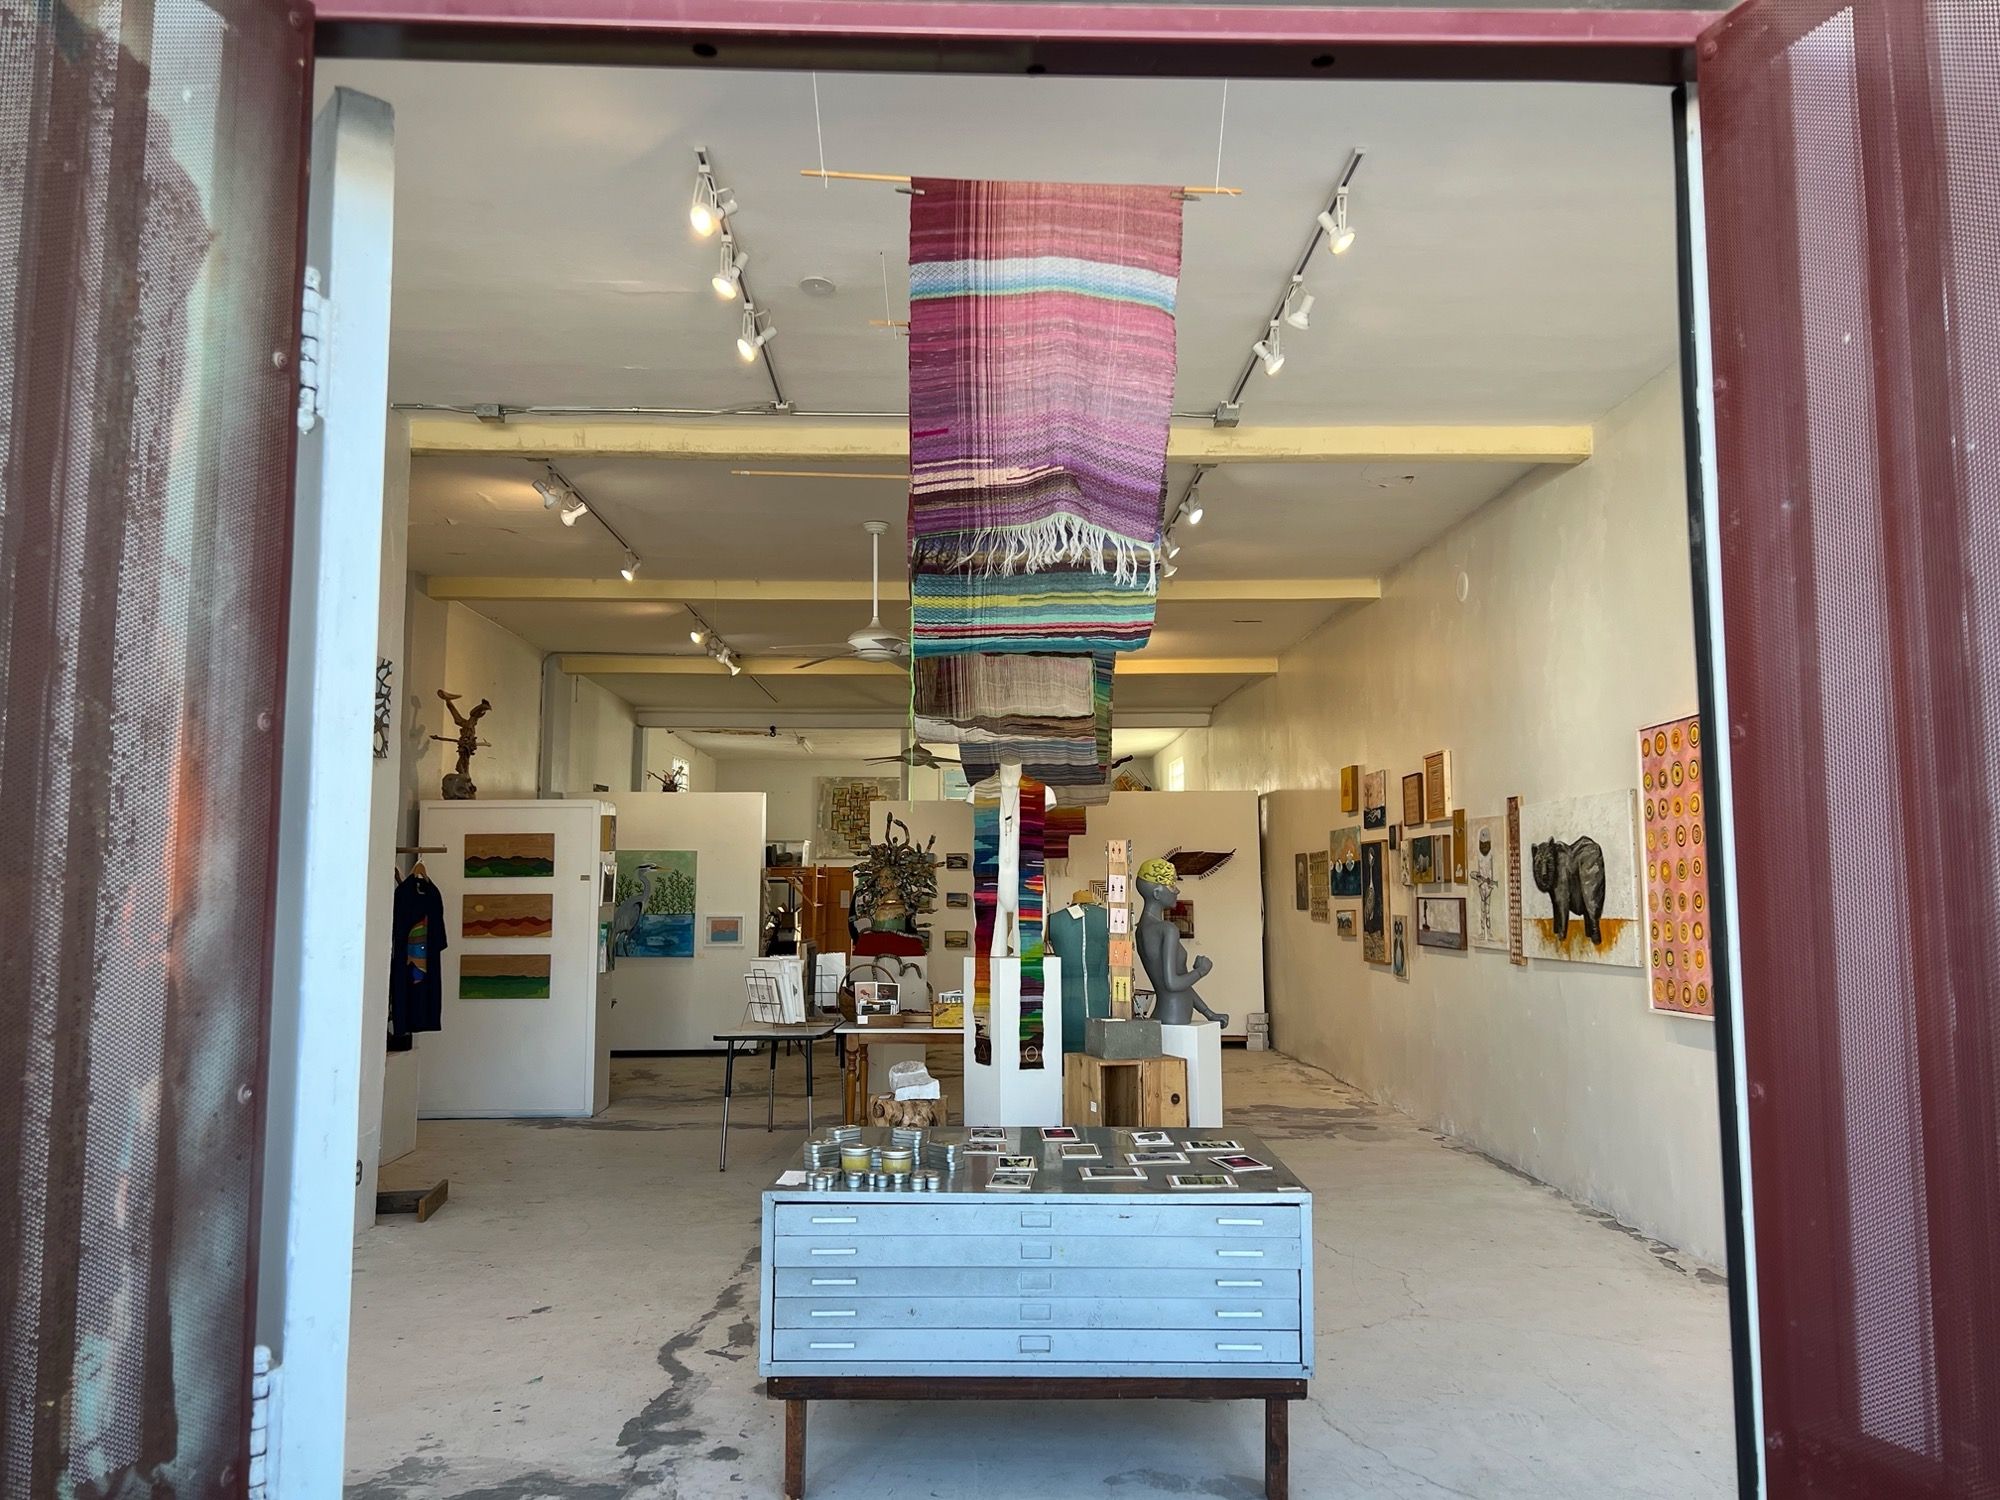 A gallery space with white walls with paintings hanging, as well as brightly colored fabric draped, hanging from the ceiling 